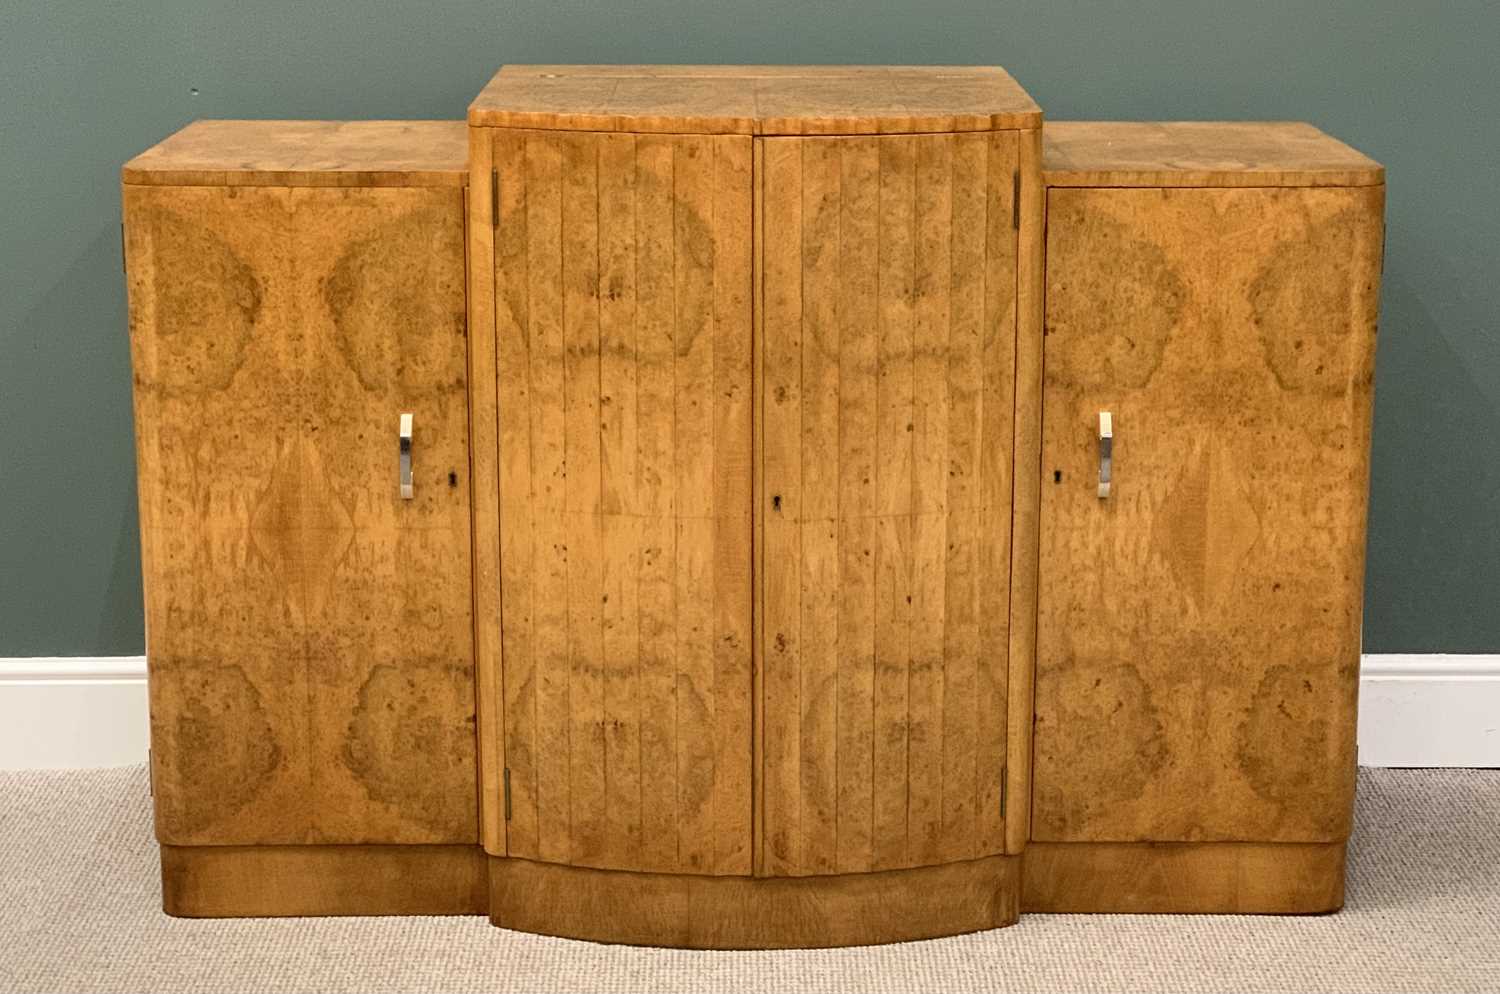 ART DECO BIRD'S EYE MAPLE VENEERED COCKTAIL CABINET SIDEBOARD, with twin fluted rib central doors - Image 2 of 8